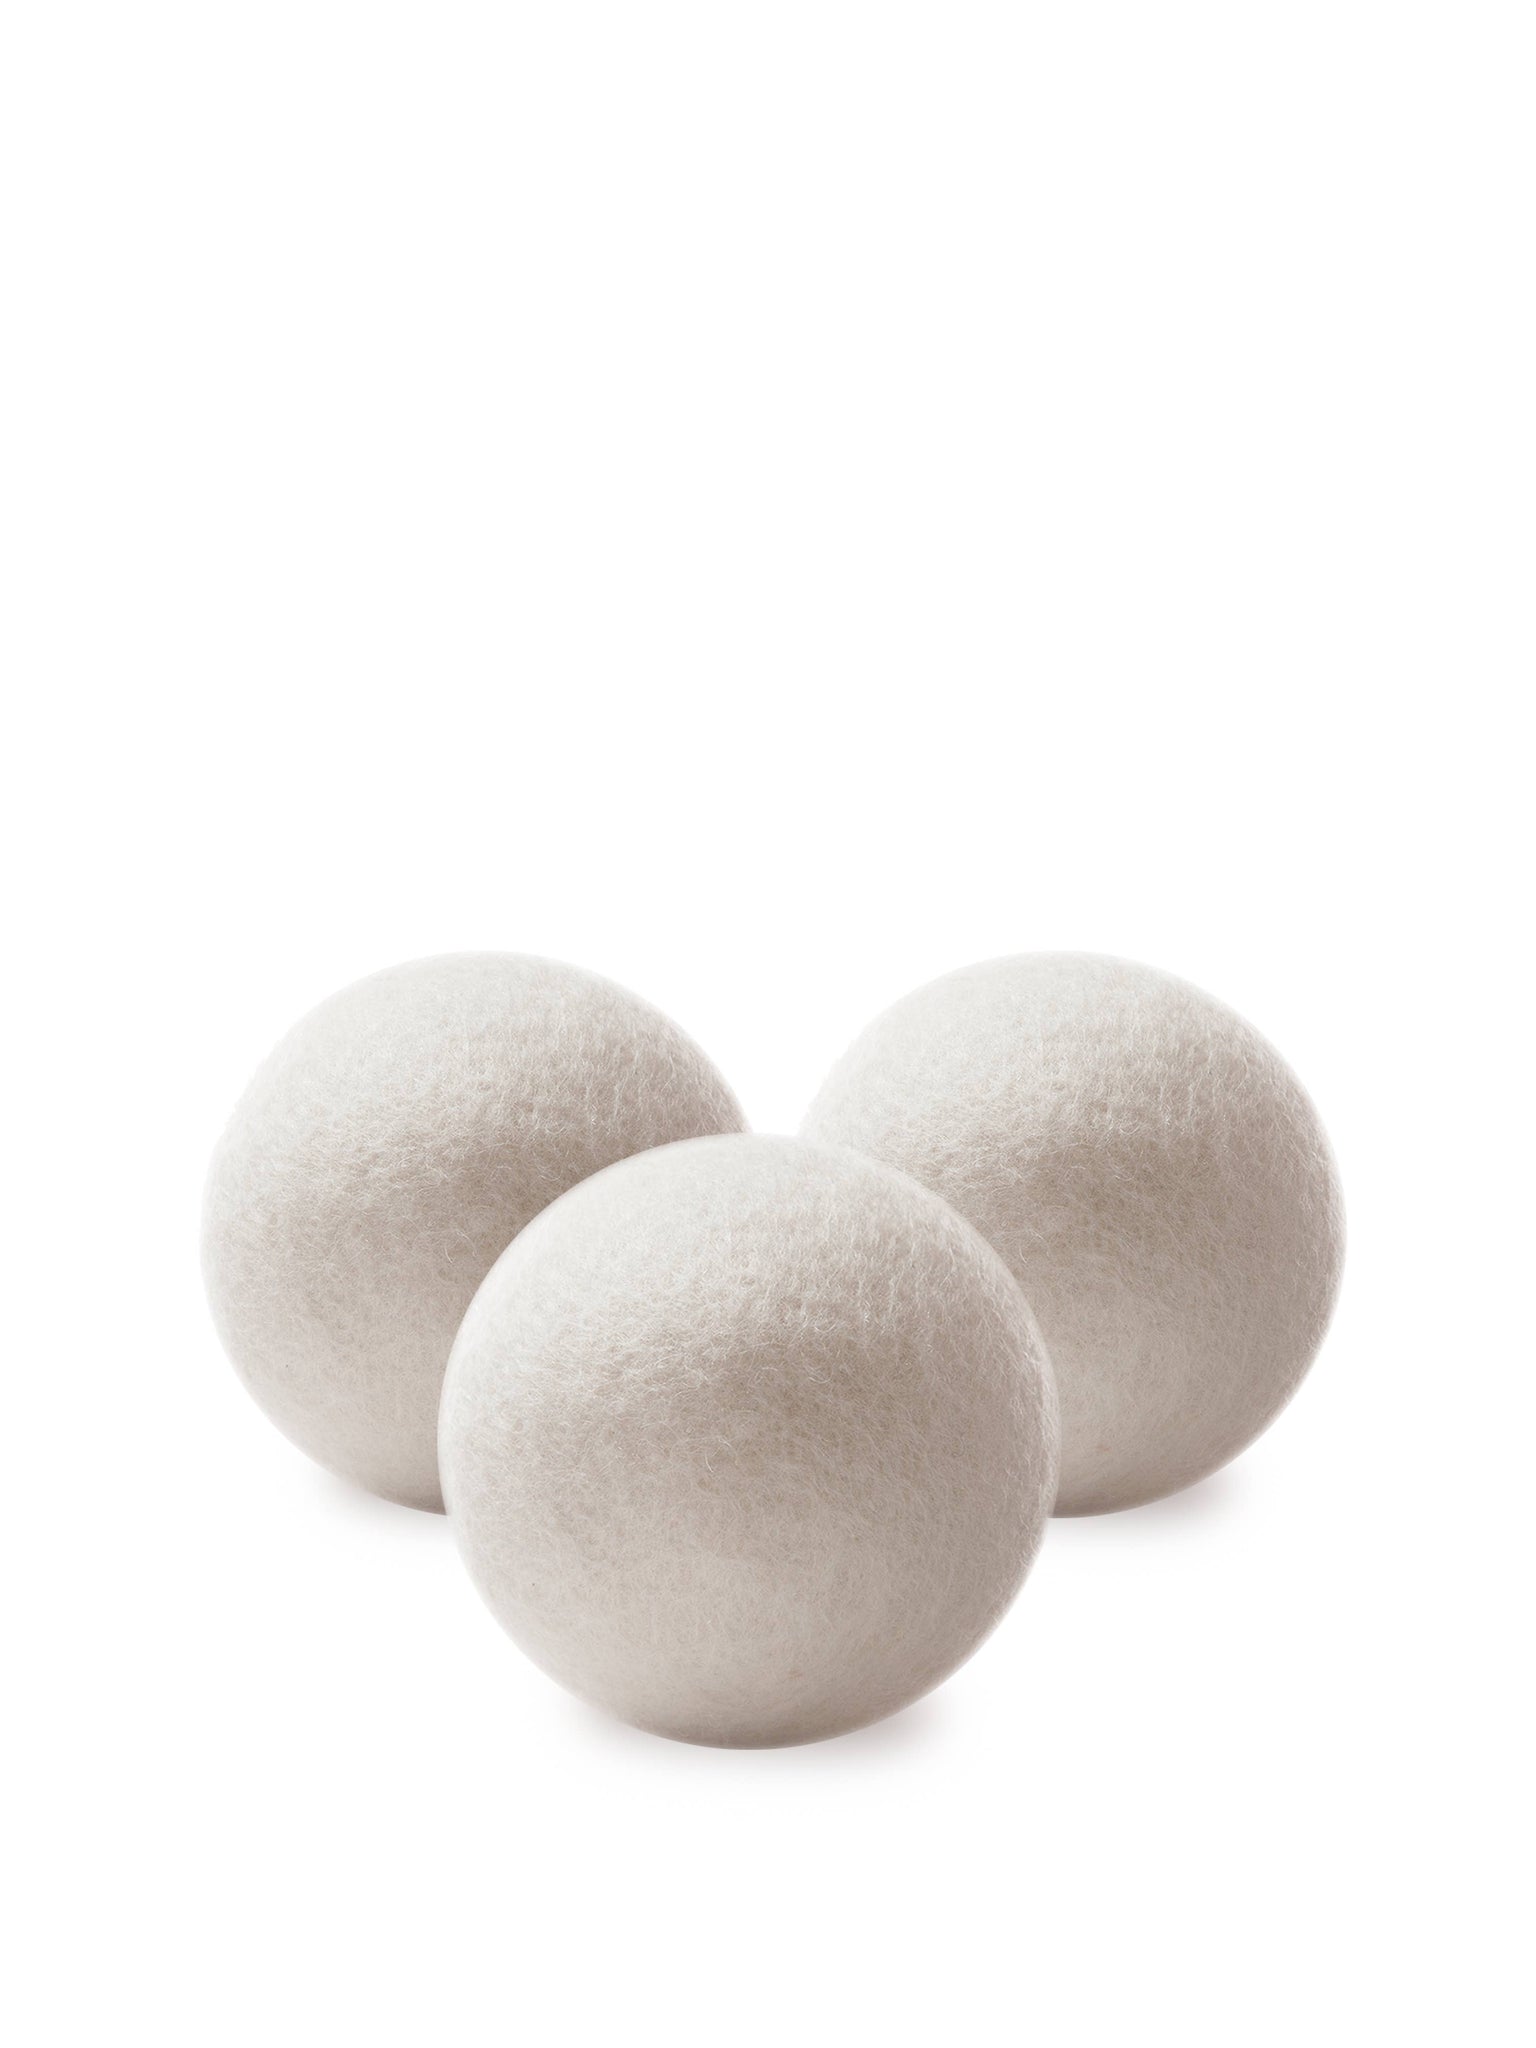 Wool Dryer Balls - 100% Wool - Natural Cream Colored  3 for $15